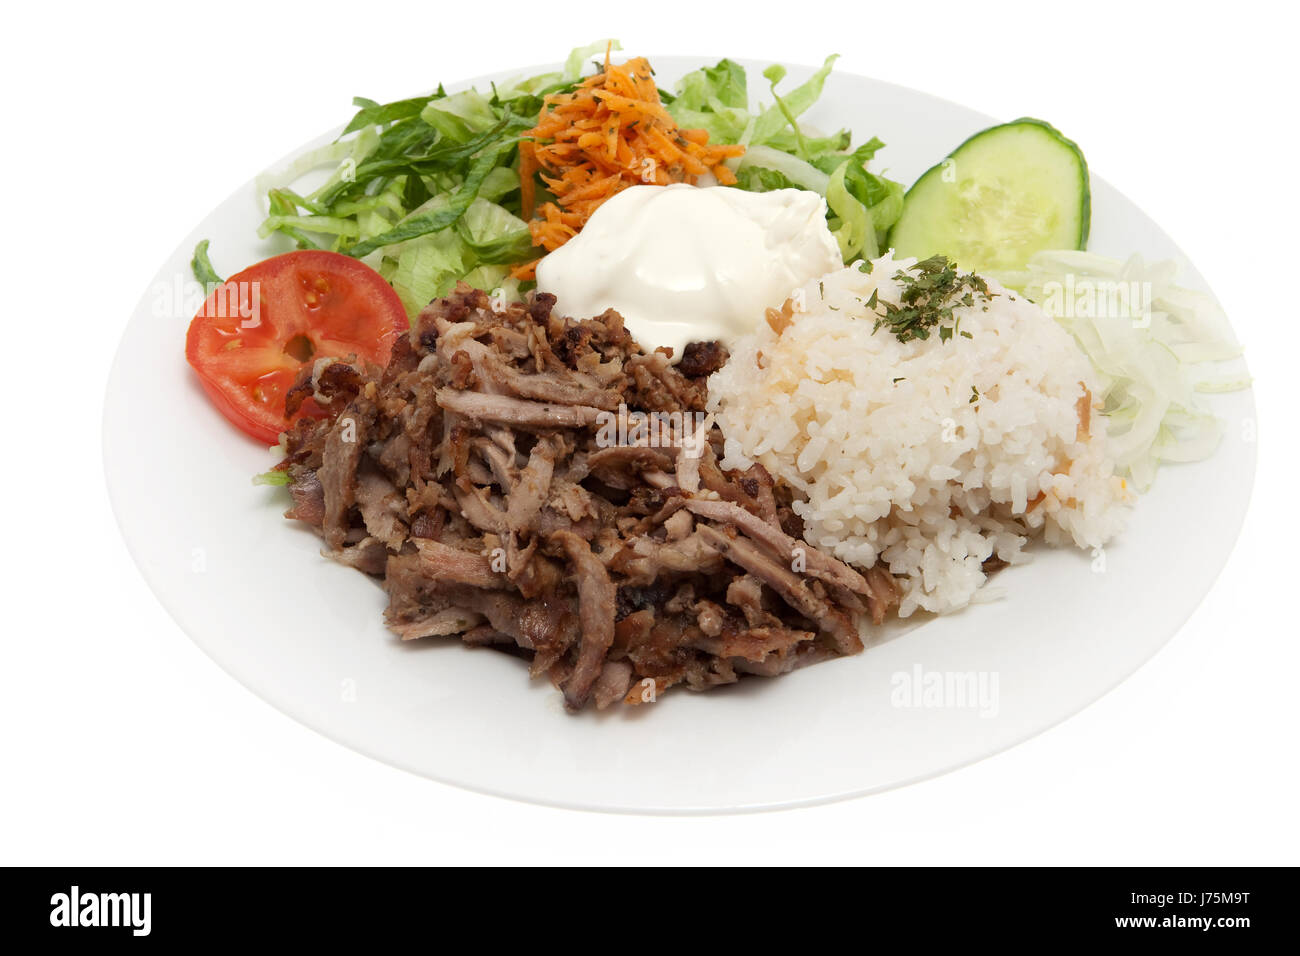 kebab restaurant plate cucumber food dish meal grill barbecue barbeque turkish Stock Photo